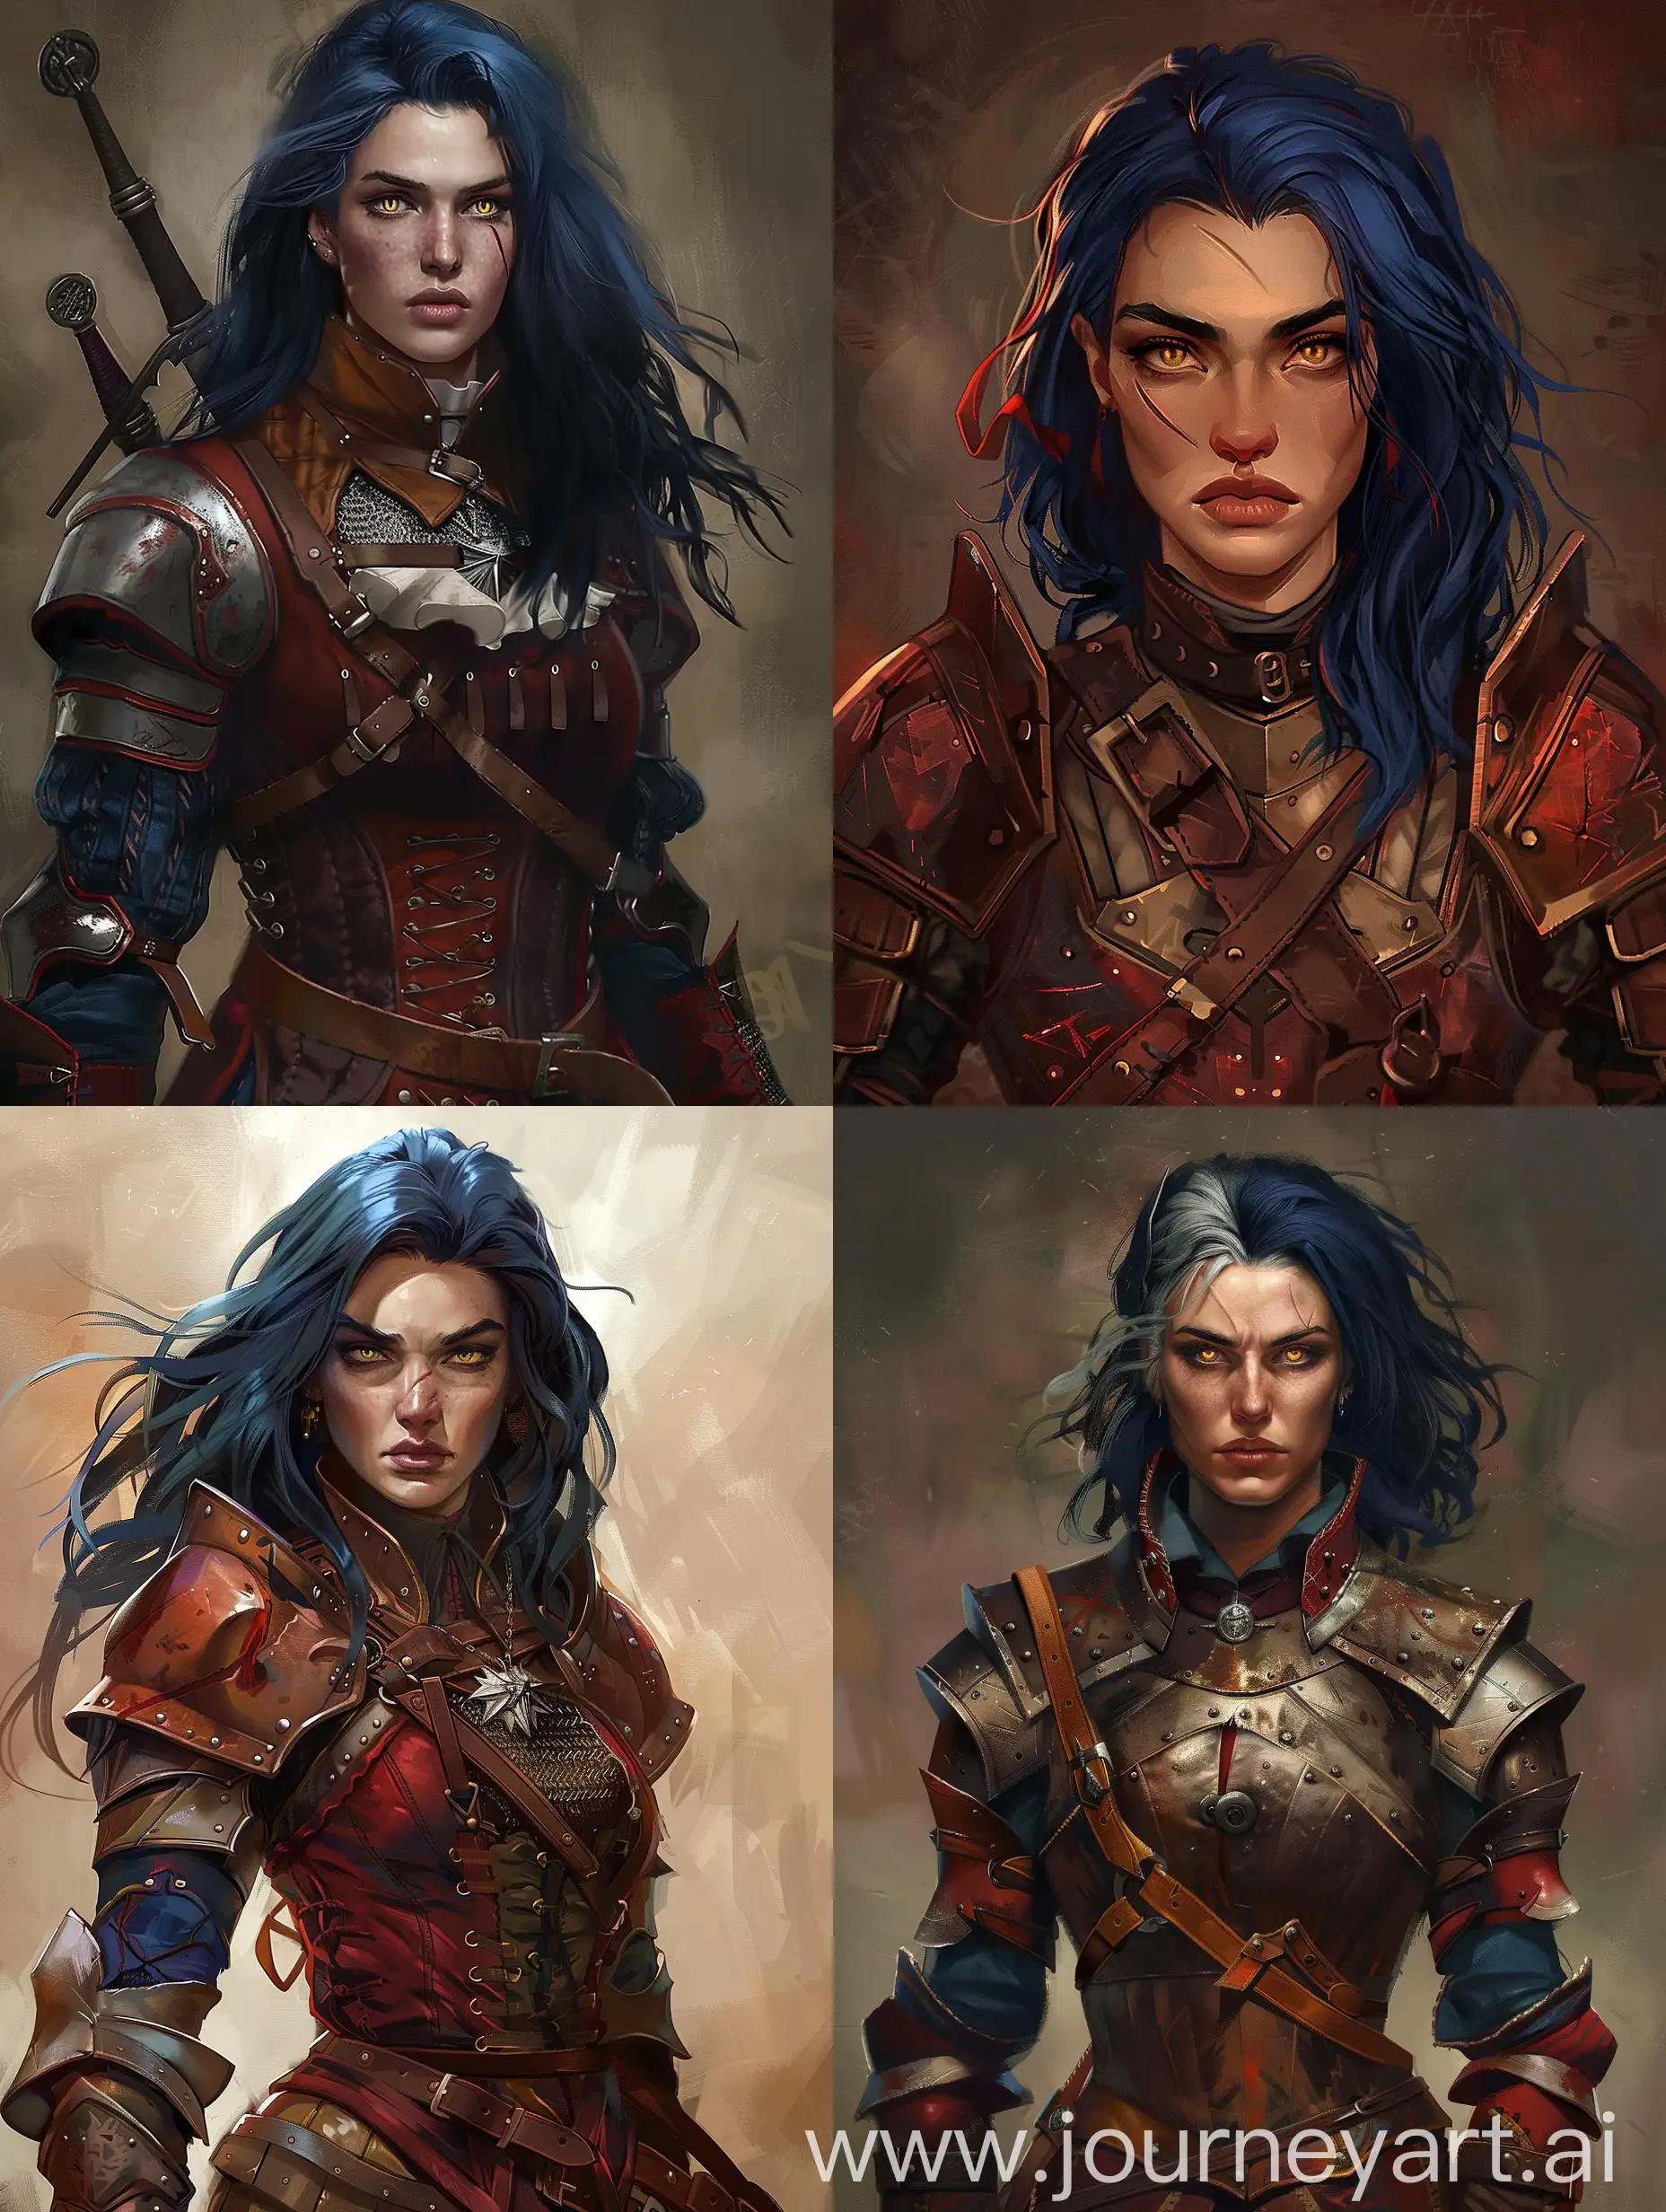 Intimidating-Woman-Witcher-in-Medieval-Armor-with-Dark-Blue-Hair